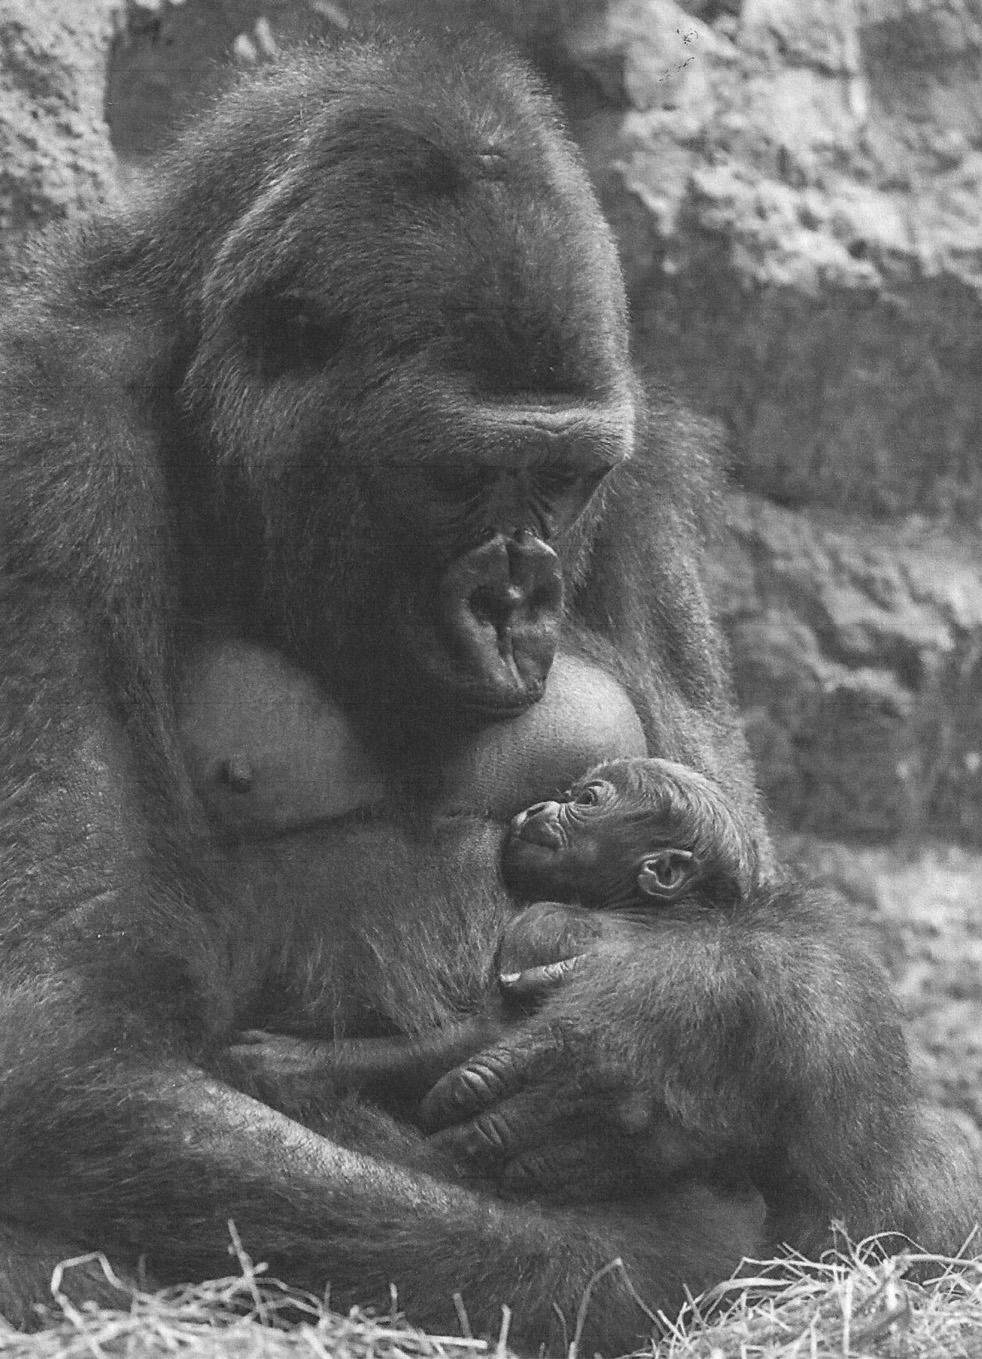 4 2 Fig. 2.1 shows a gorilla with her baby. Fig. 2.1 (a) Gorillas are mammals and have characteristics that are only found in mammals, and not in any other vertebrate group.